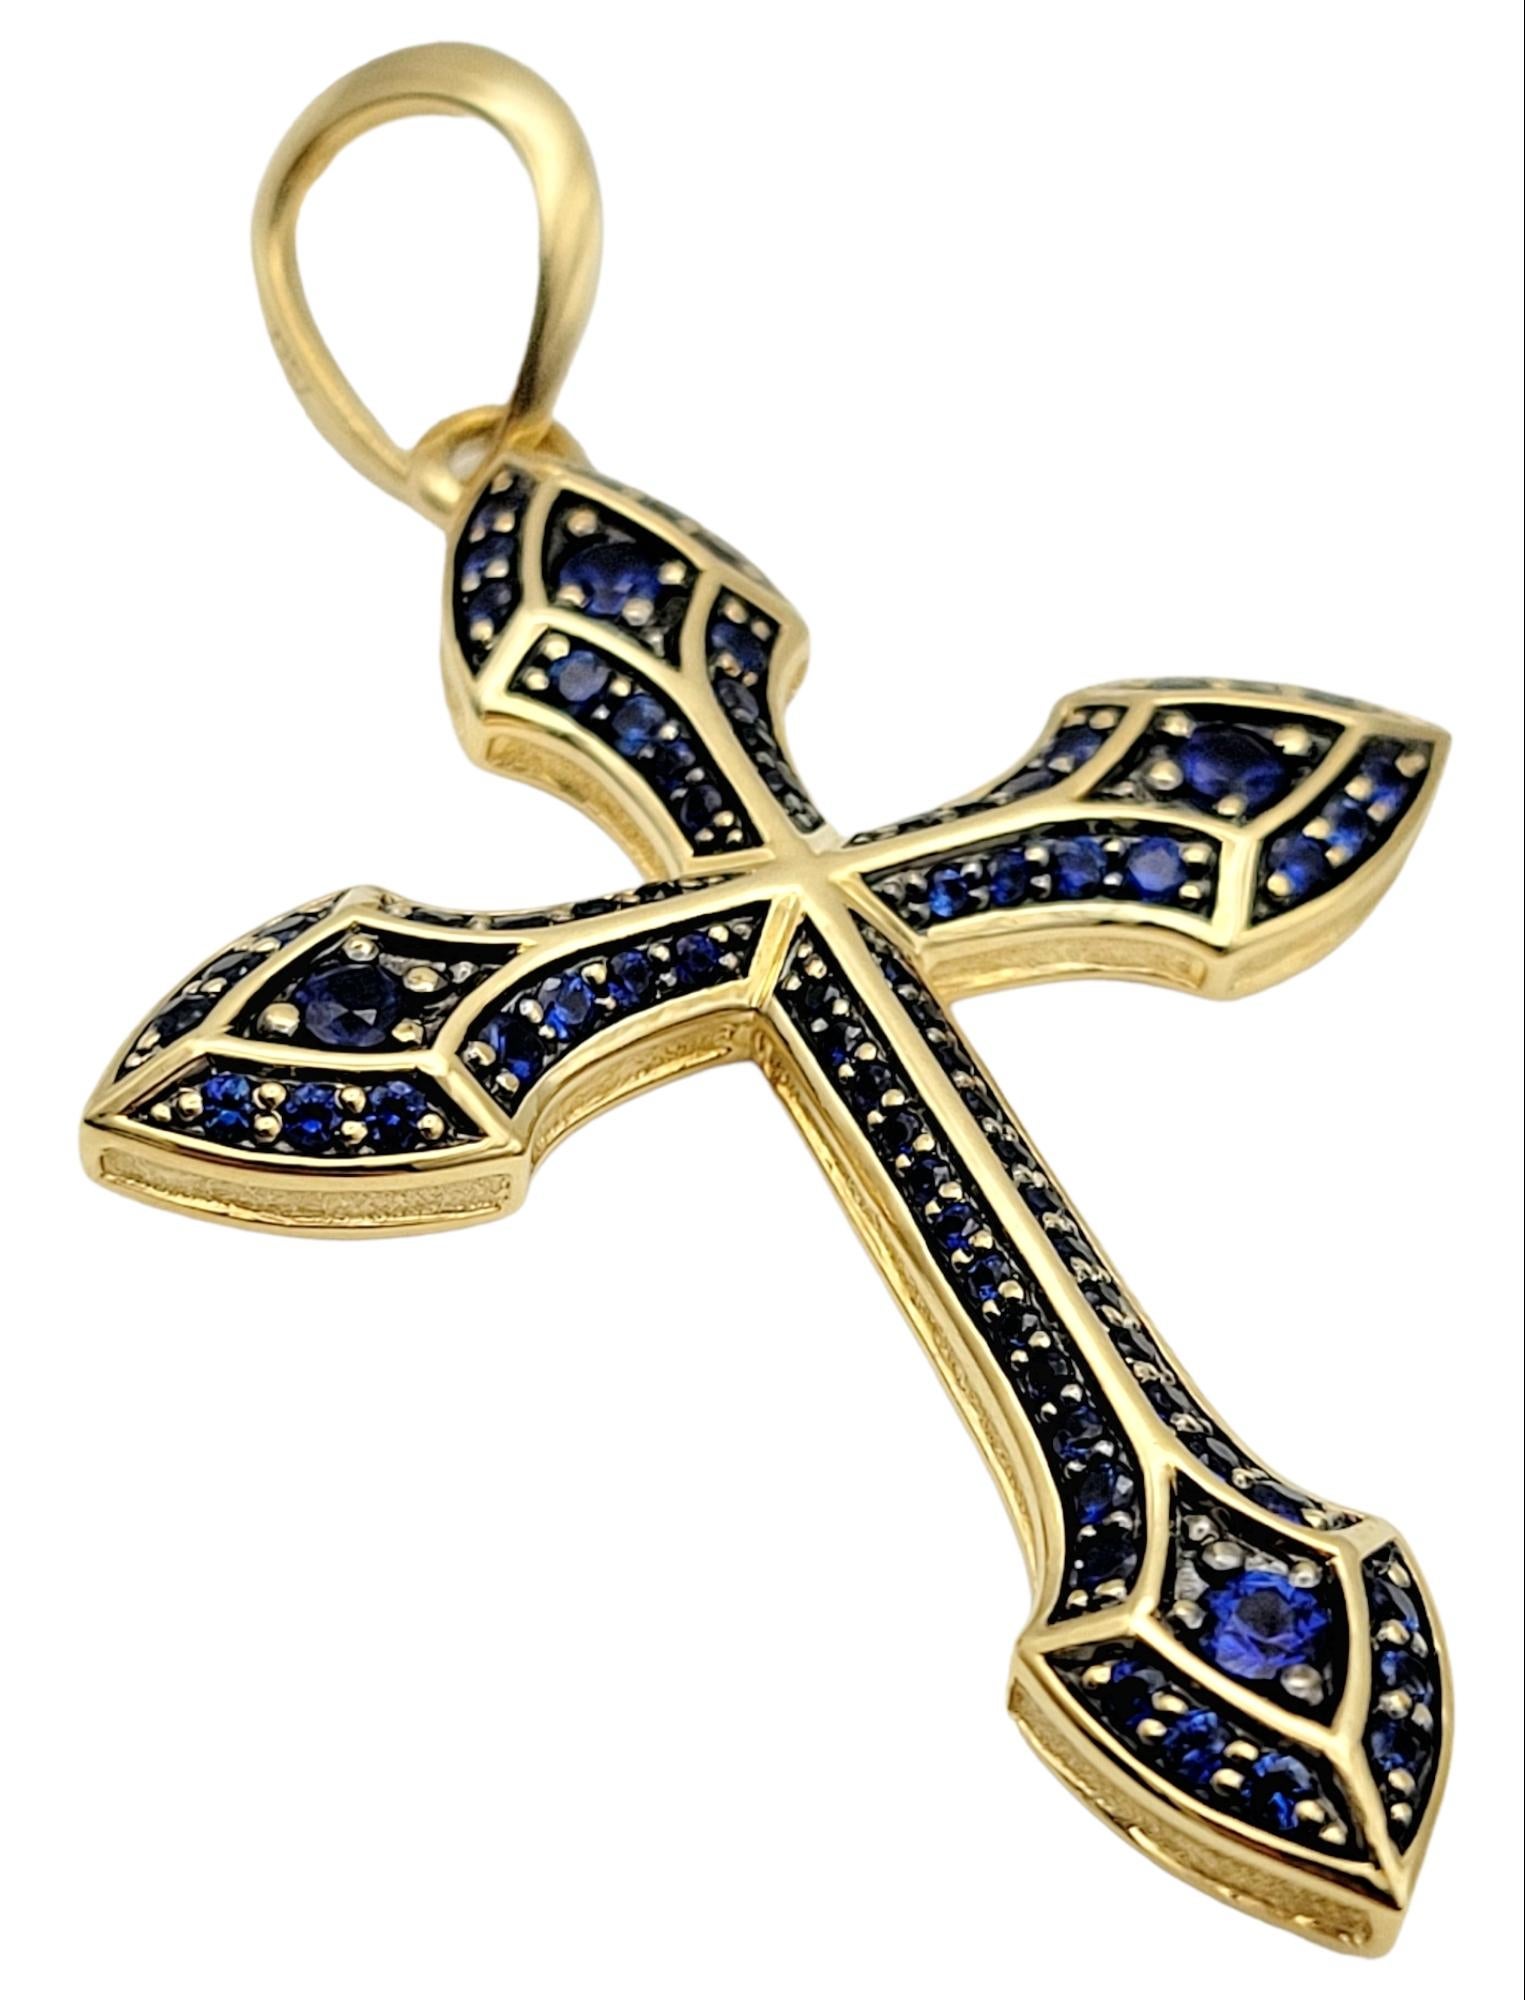 Contemporary David Yurman Men's Gothic Cross Amulet with Natural Sapphires in 18 Karat Gold